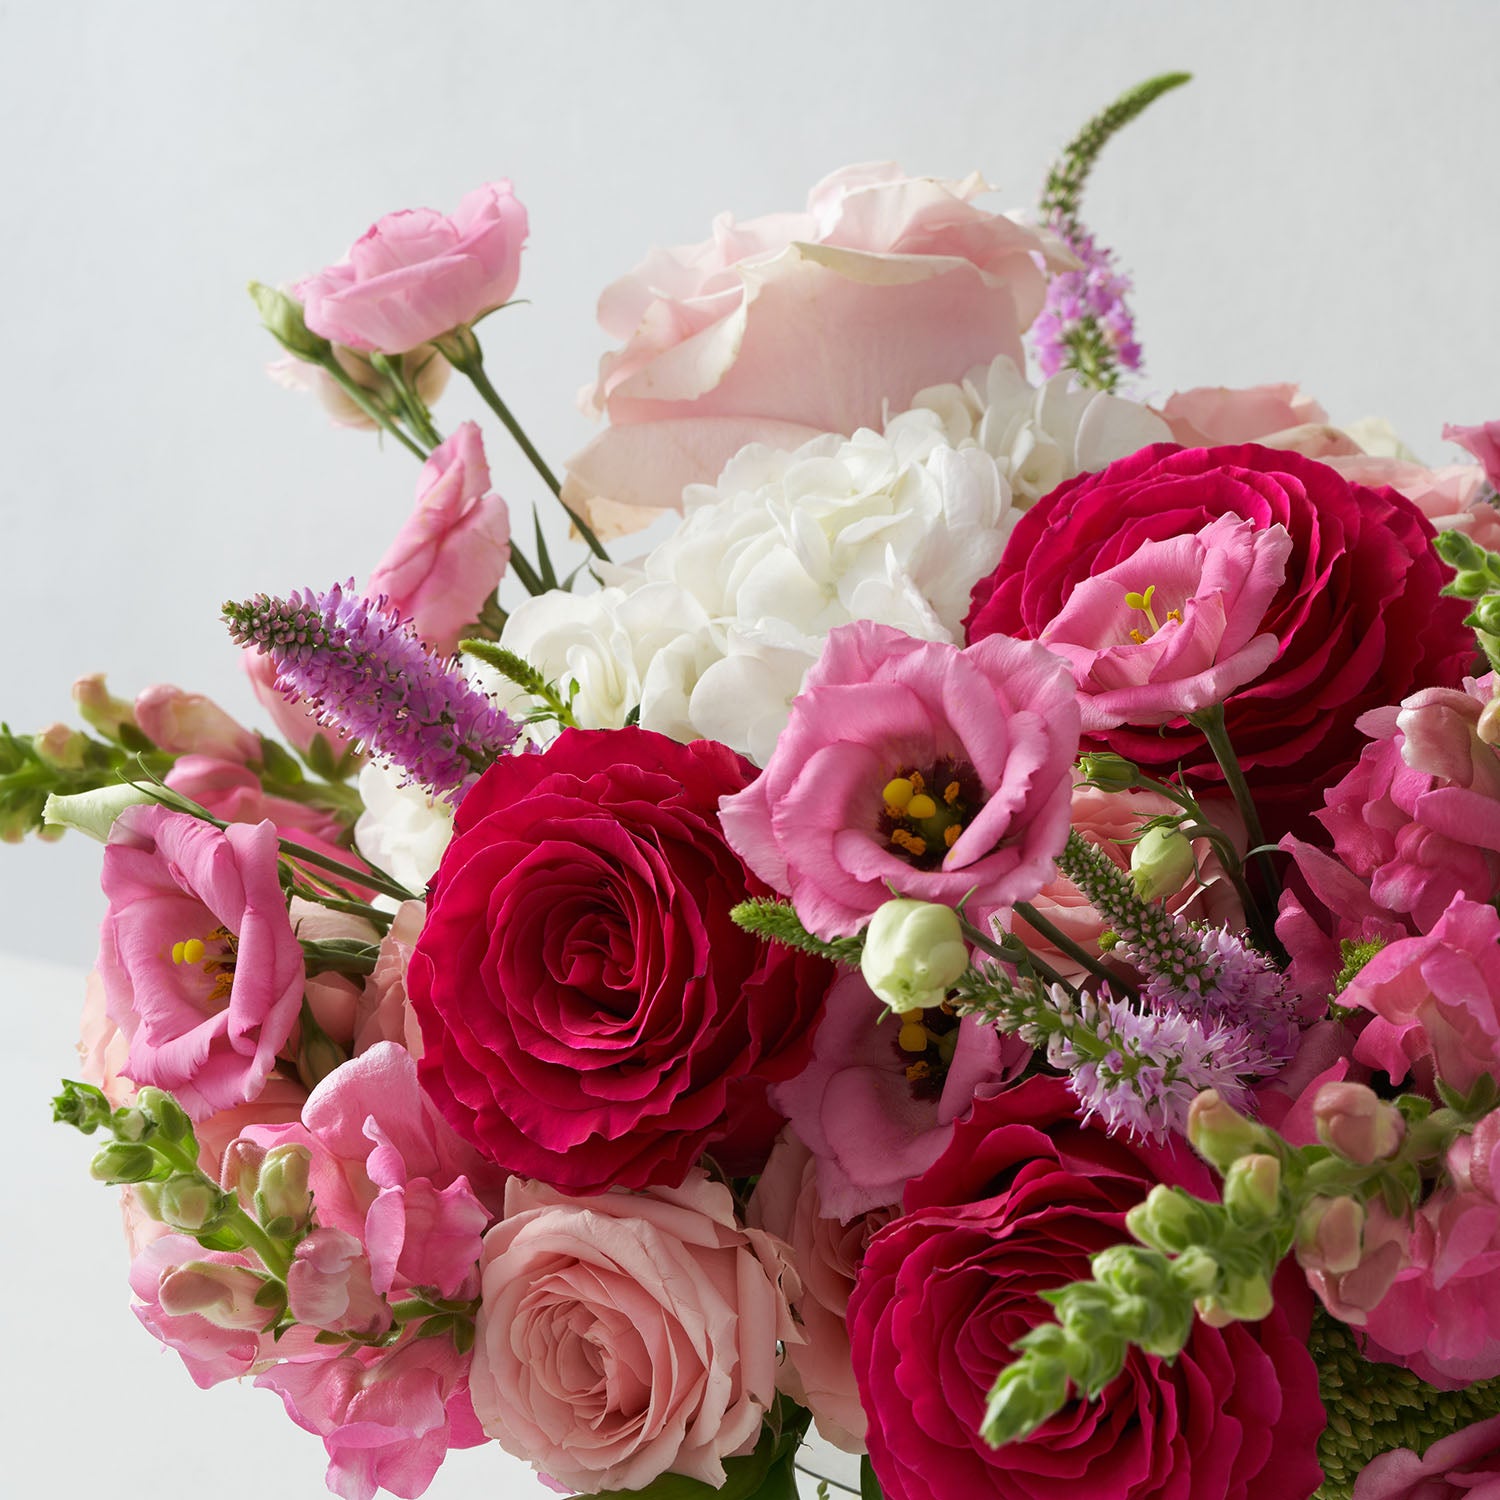 Closeup of hot pink roses, pink lisianthus, pink snapdragon amd white hydrangea.